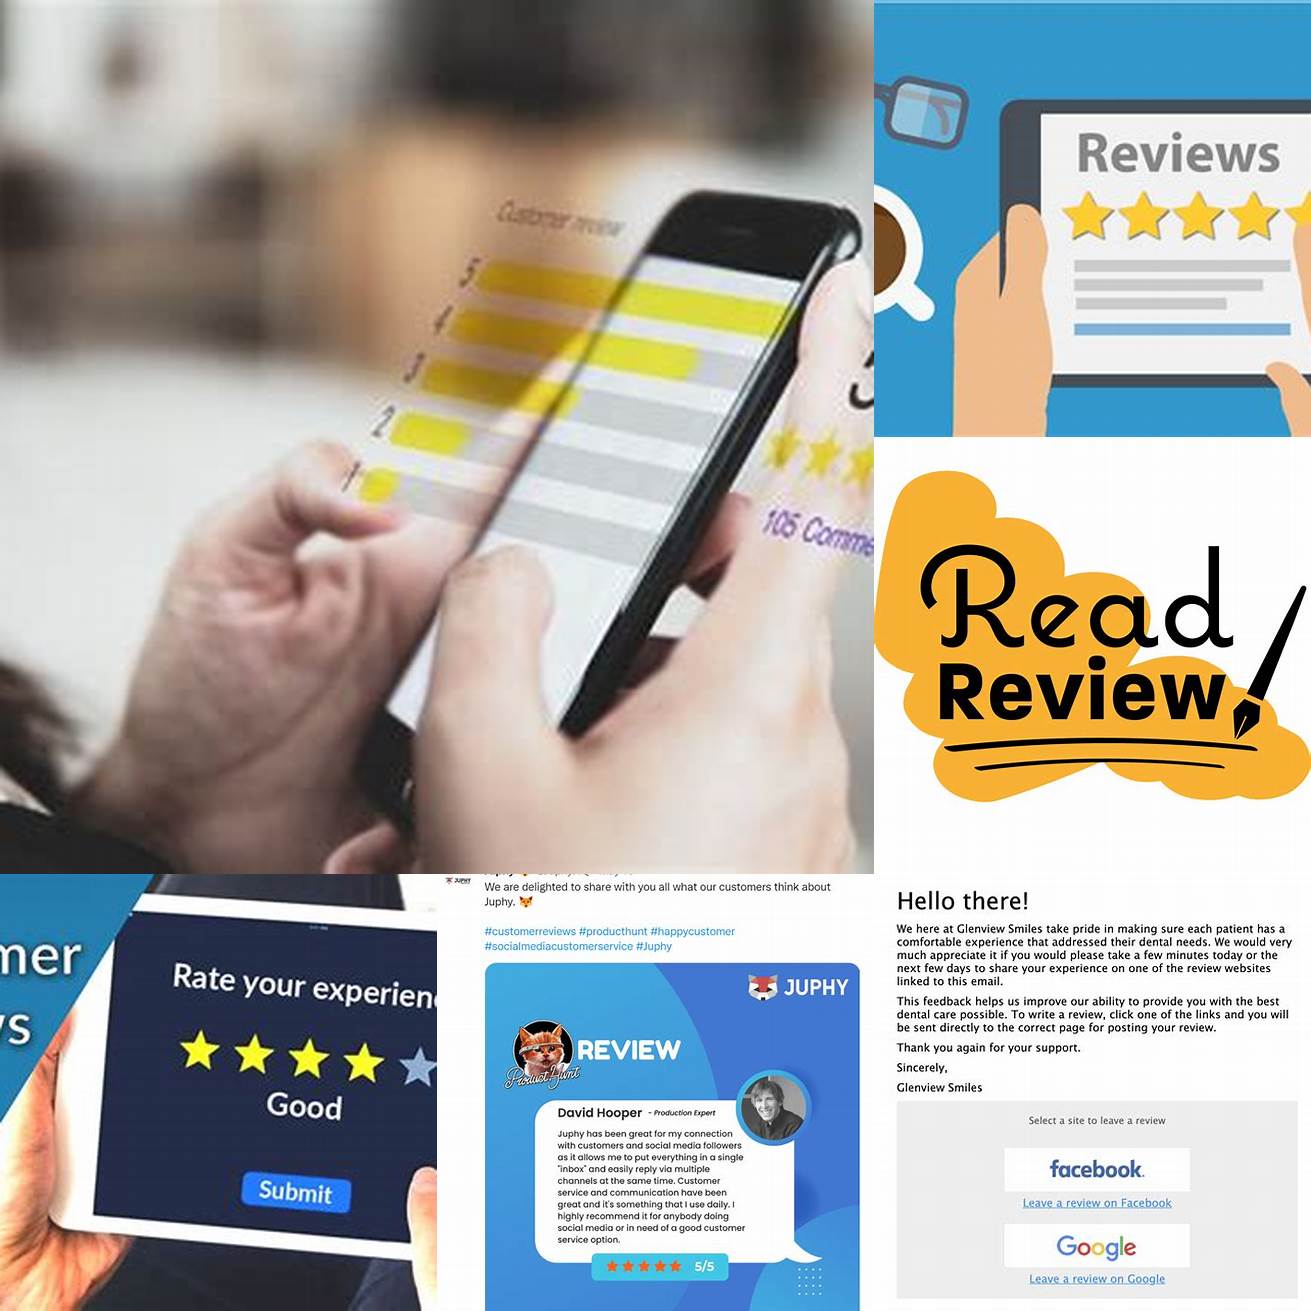 Read reviews - Look for reviews from other customers to help you make an informed decision